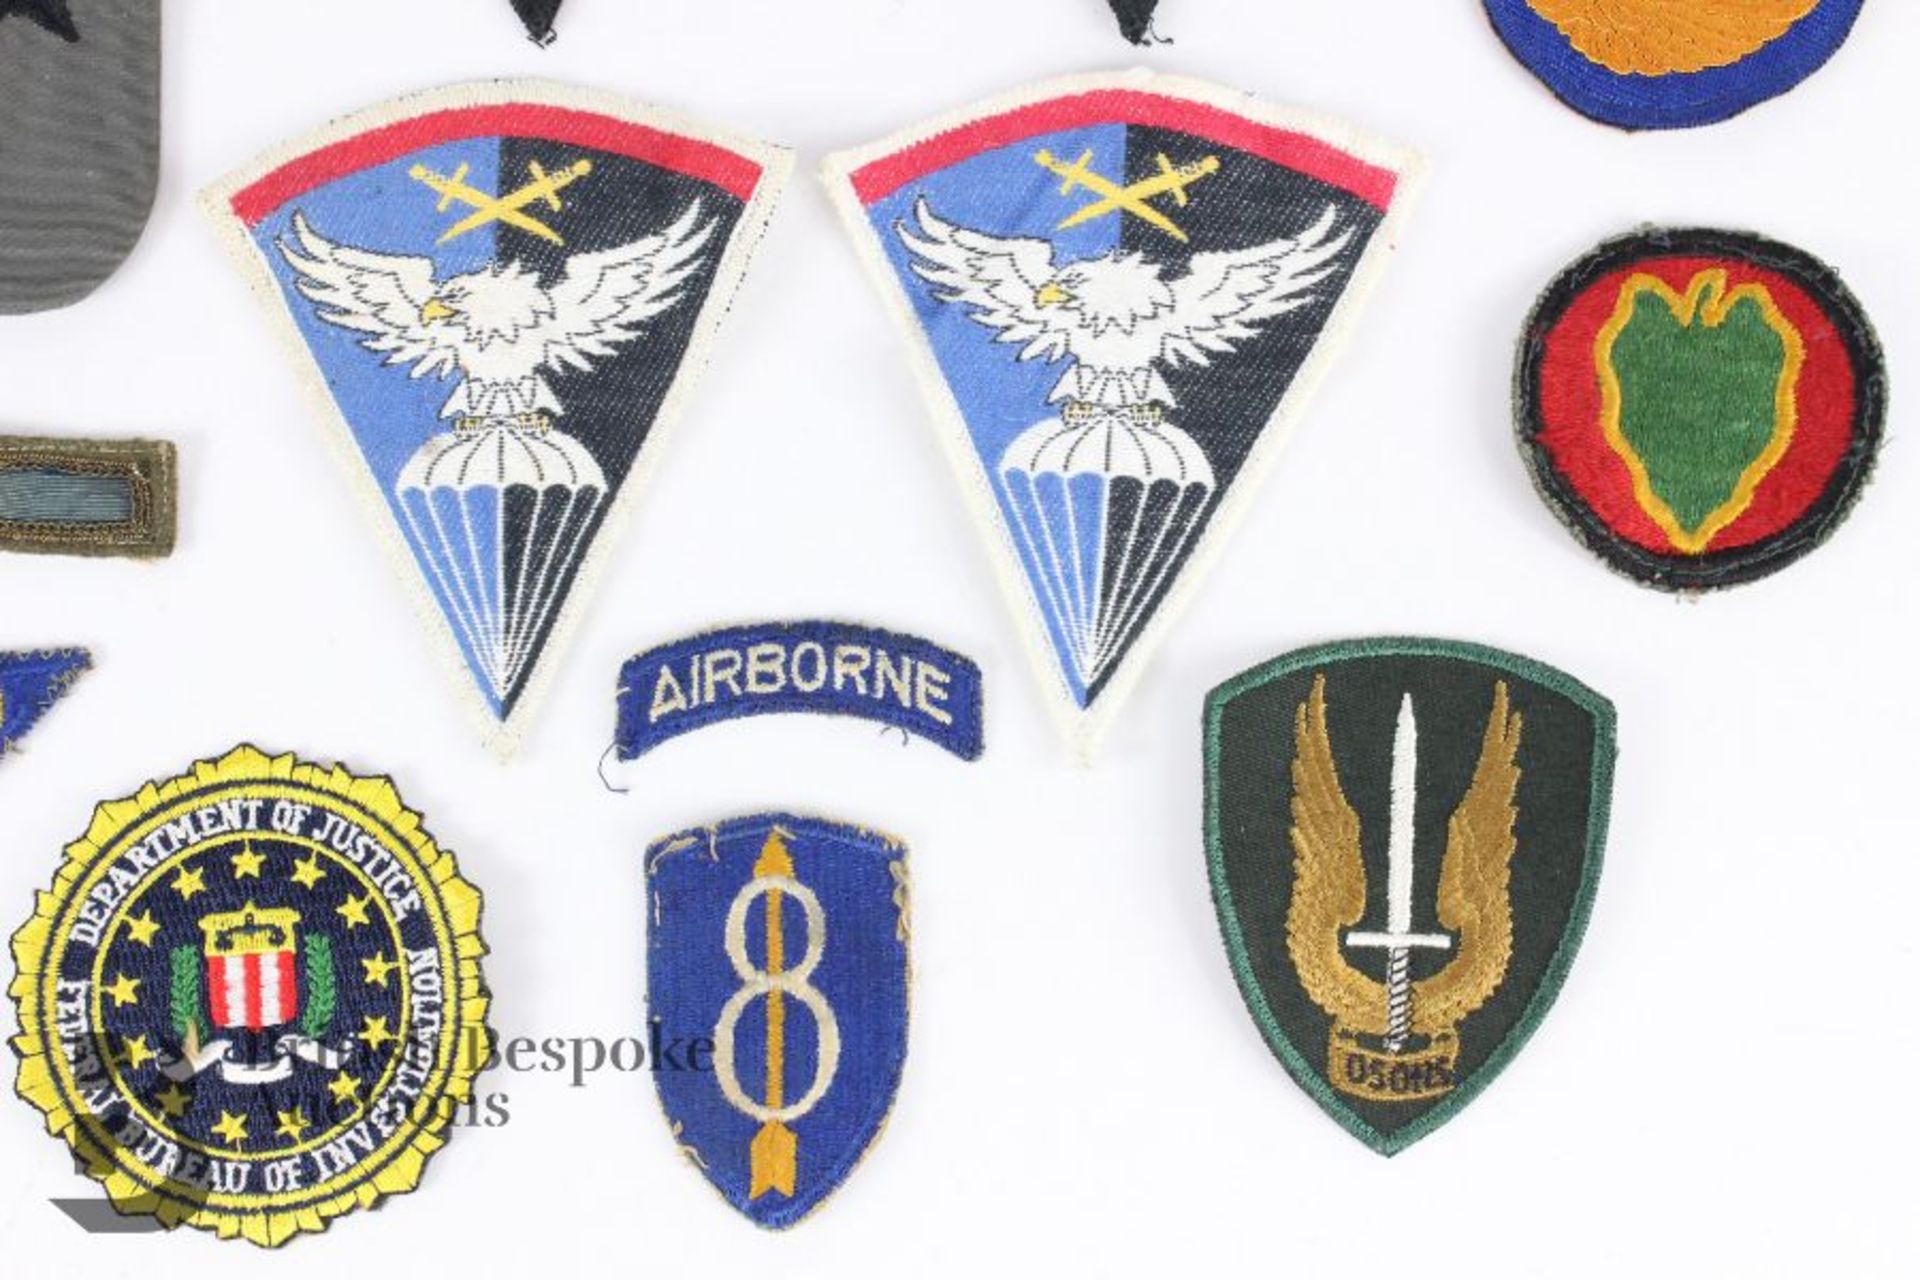 Royal Air Force and Air Training Corps Insignia and Metal Badges, Canadian Airborne Badges - Image 10 of 11